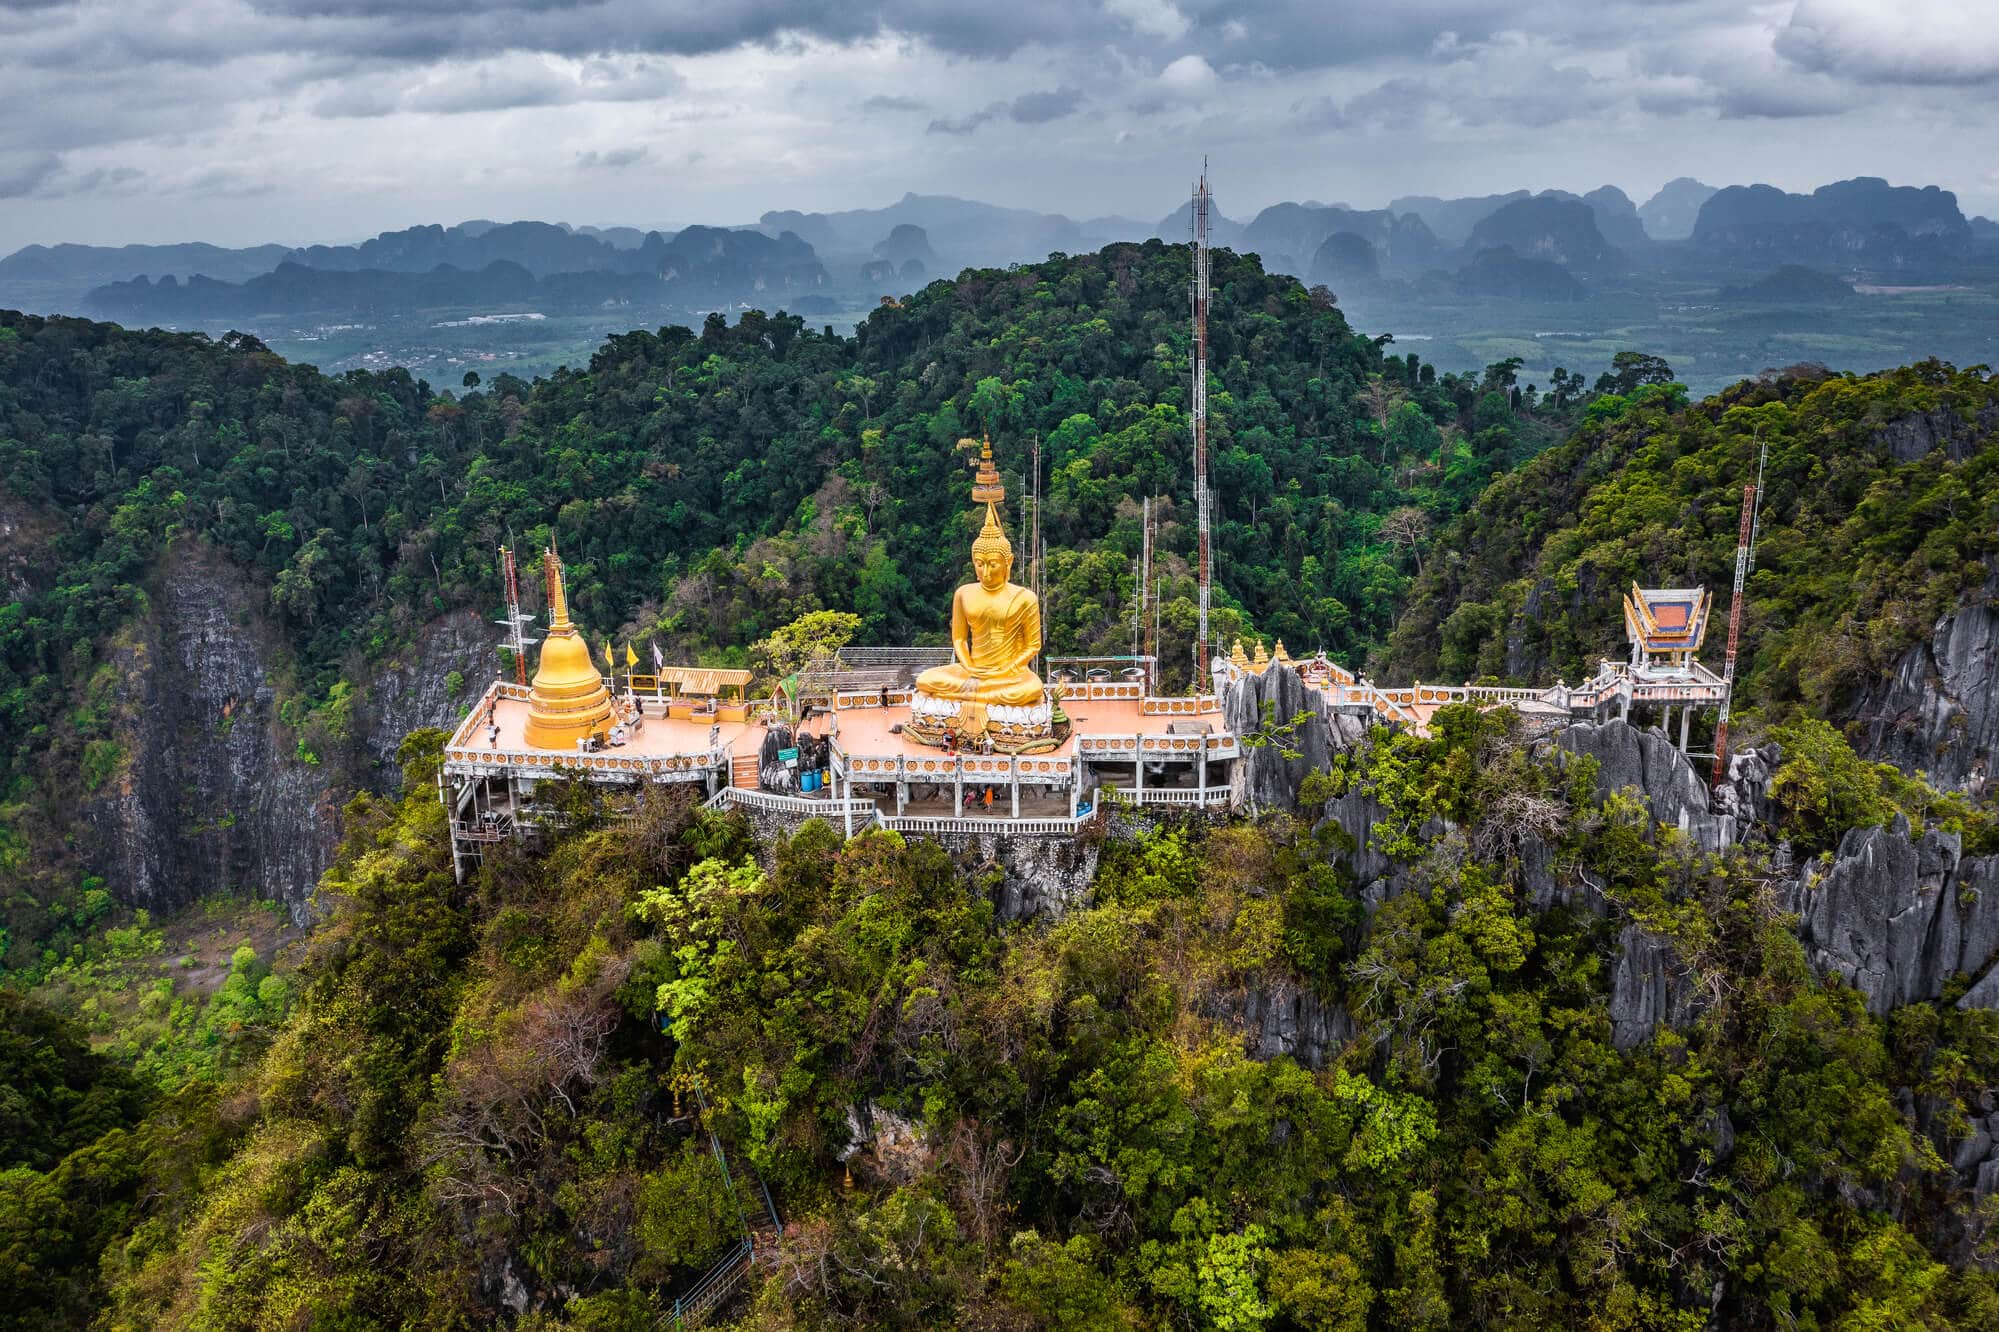 Drone view of the Tiger Cave Temple with a large gold Buddha sitting above the treet tops in the jungle with rolling hills in the background. Seen during a fantastic tour in Krabi.